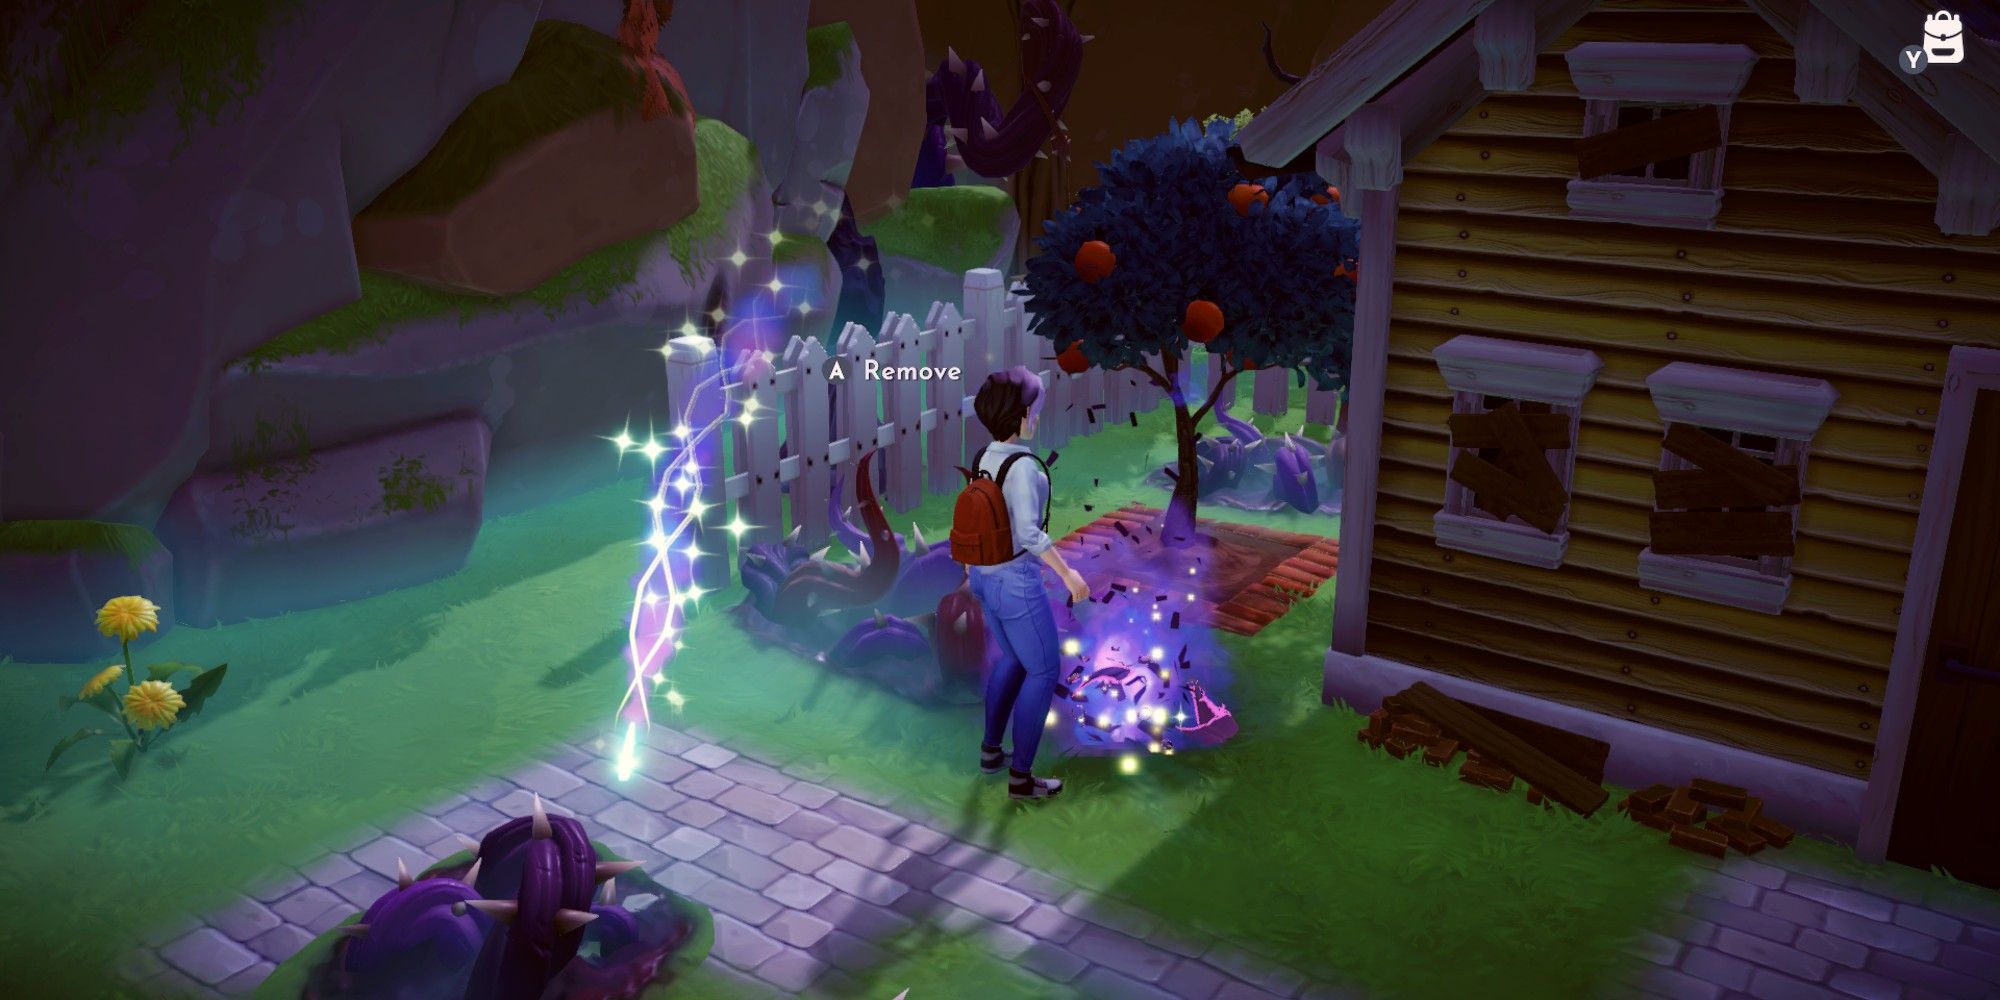 The protagonist removing Night Thorns outside her house in Dreamlight Valley